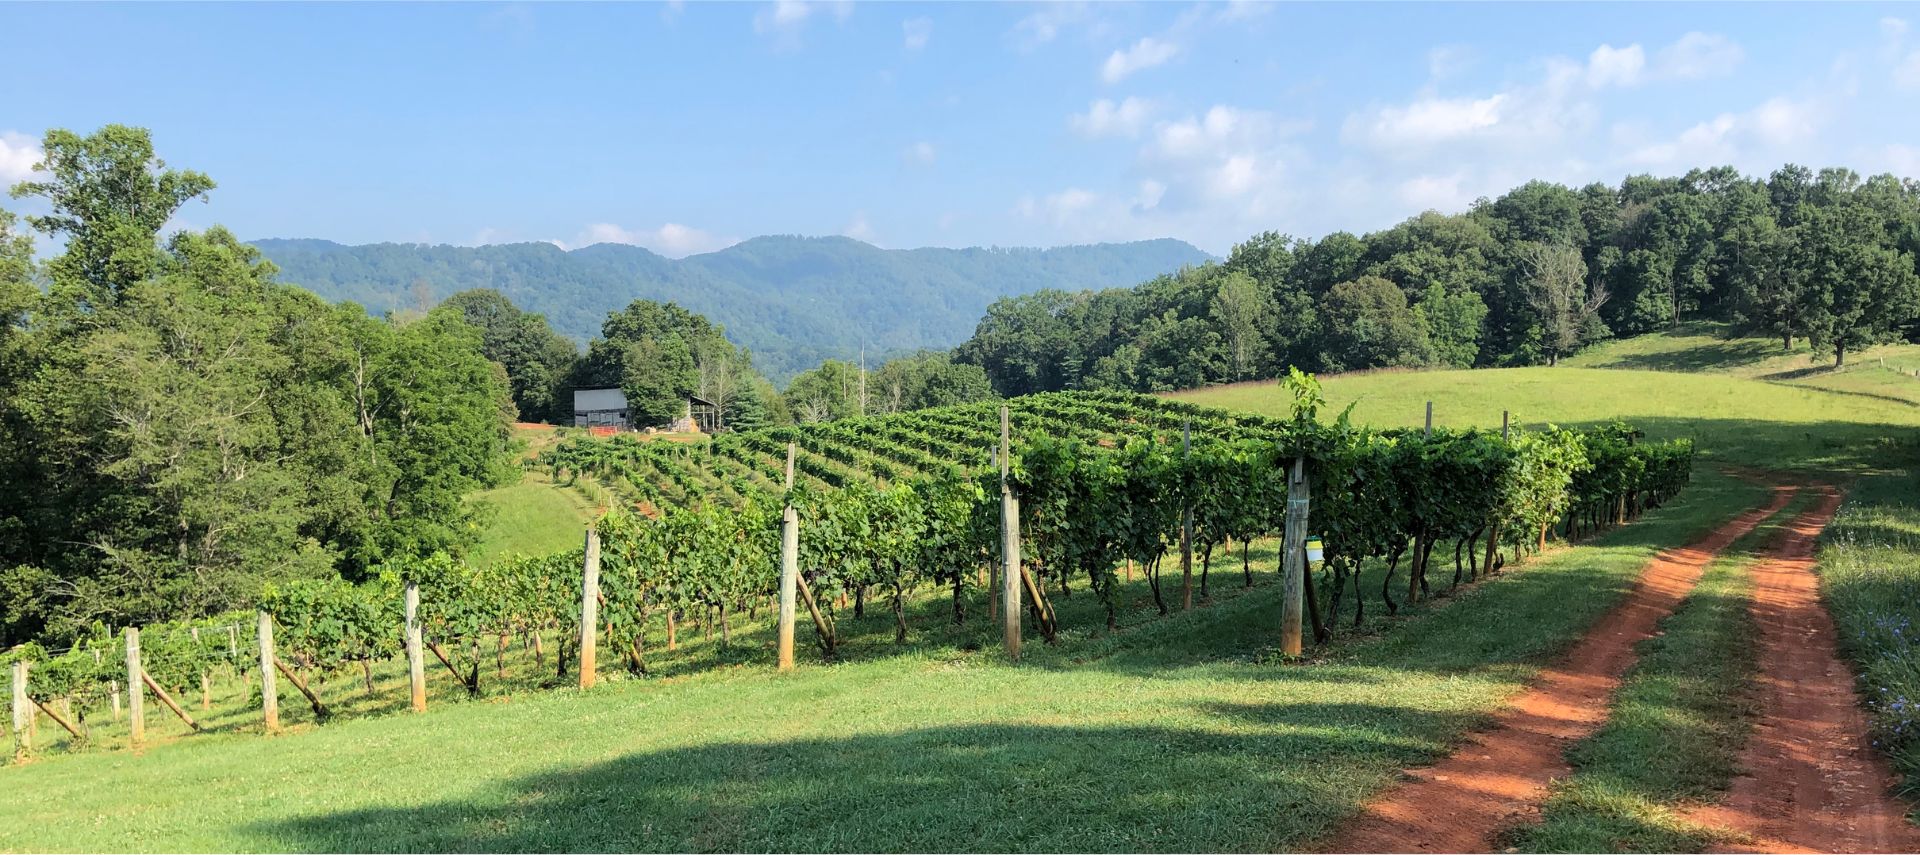 View of Addison Farm Vineyard with dirt path towards barn and mountains in the background